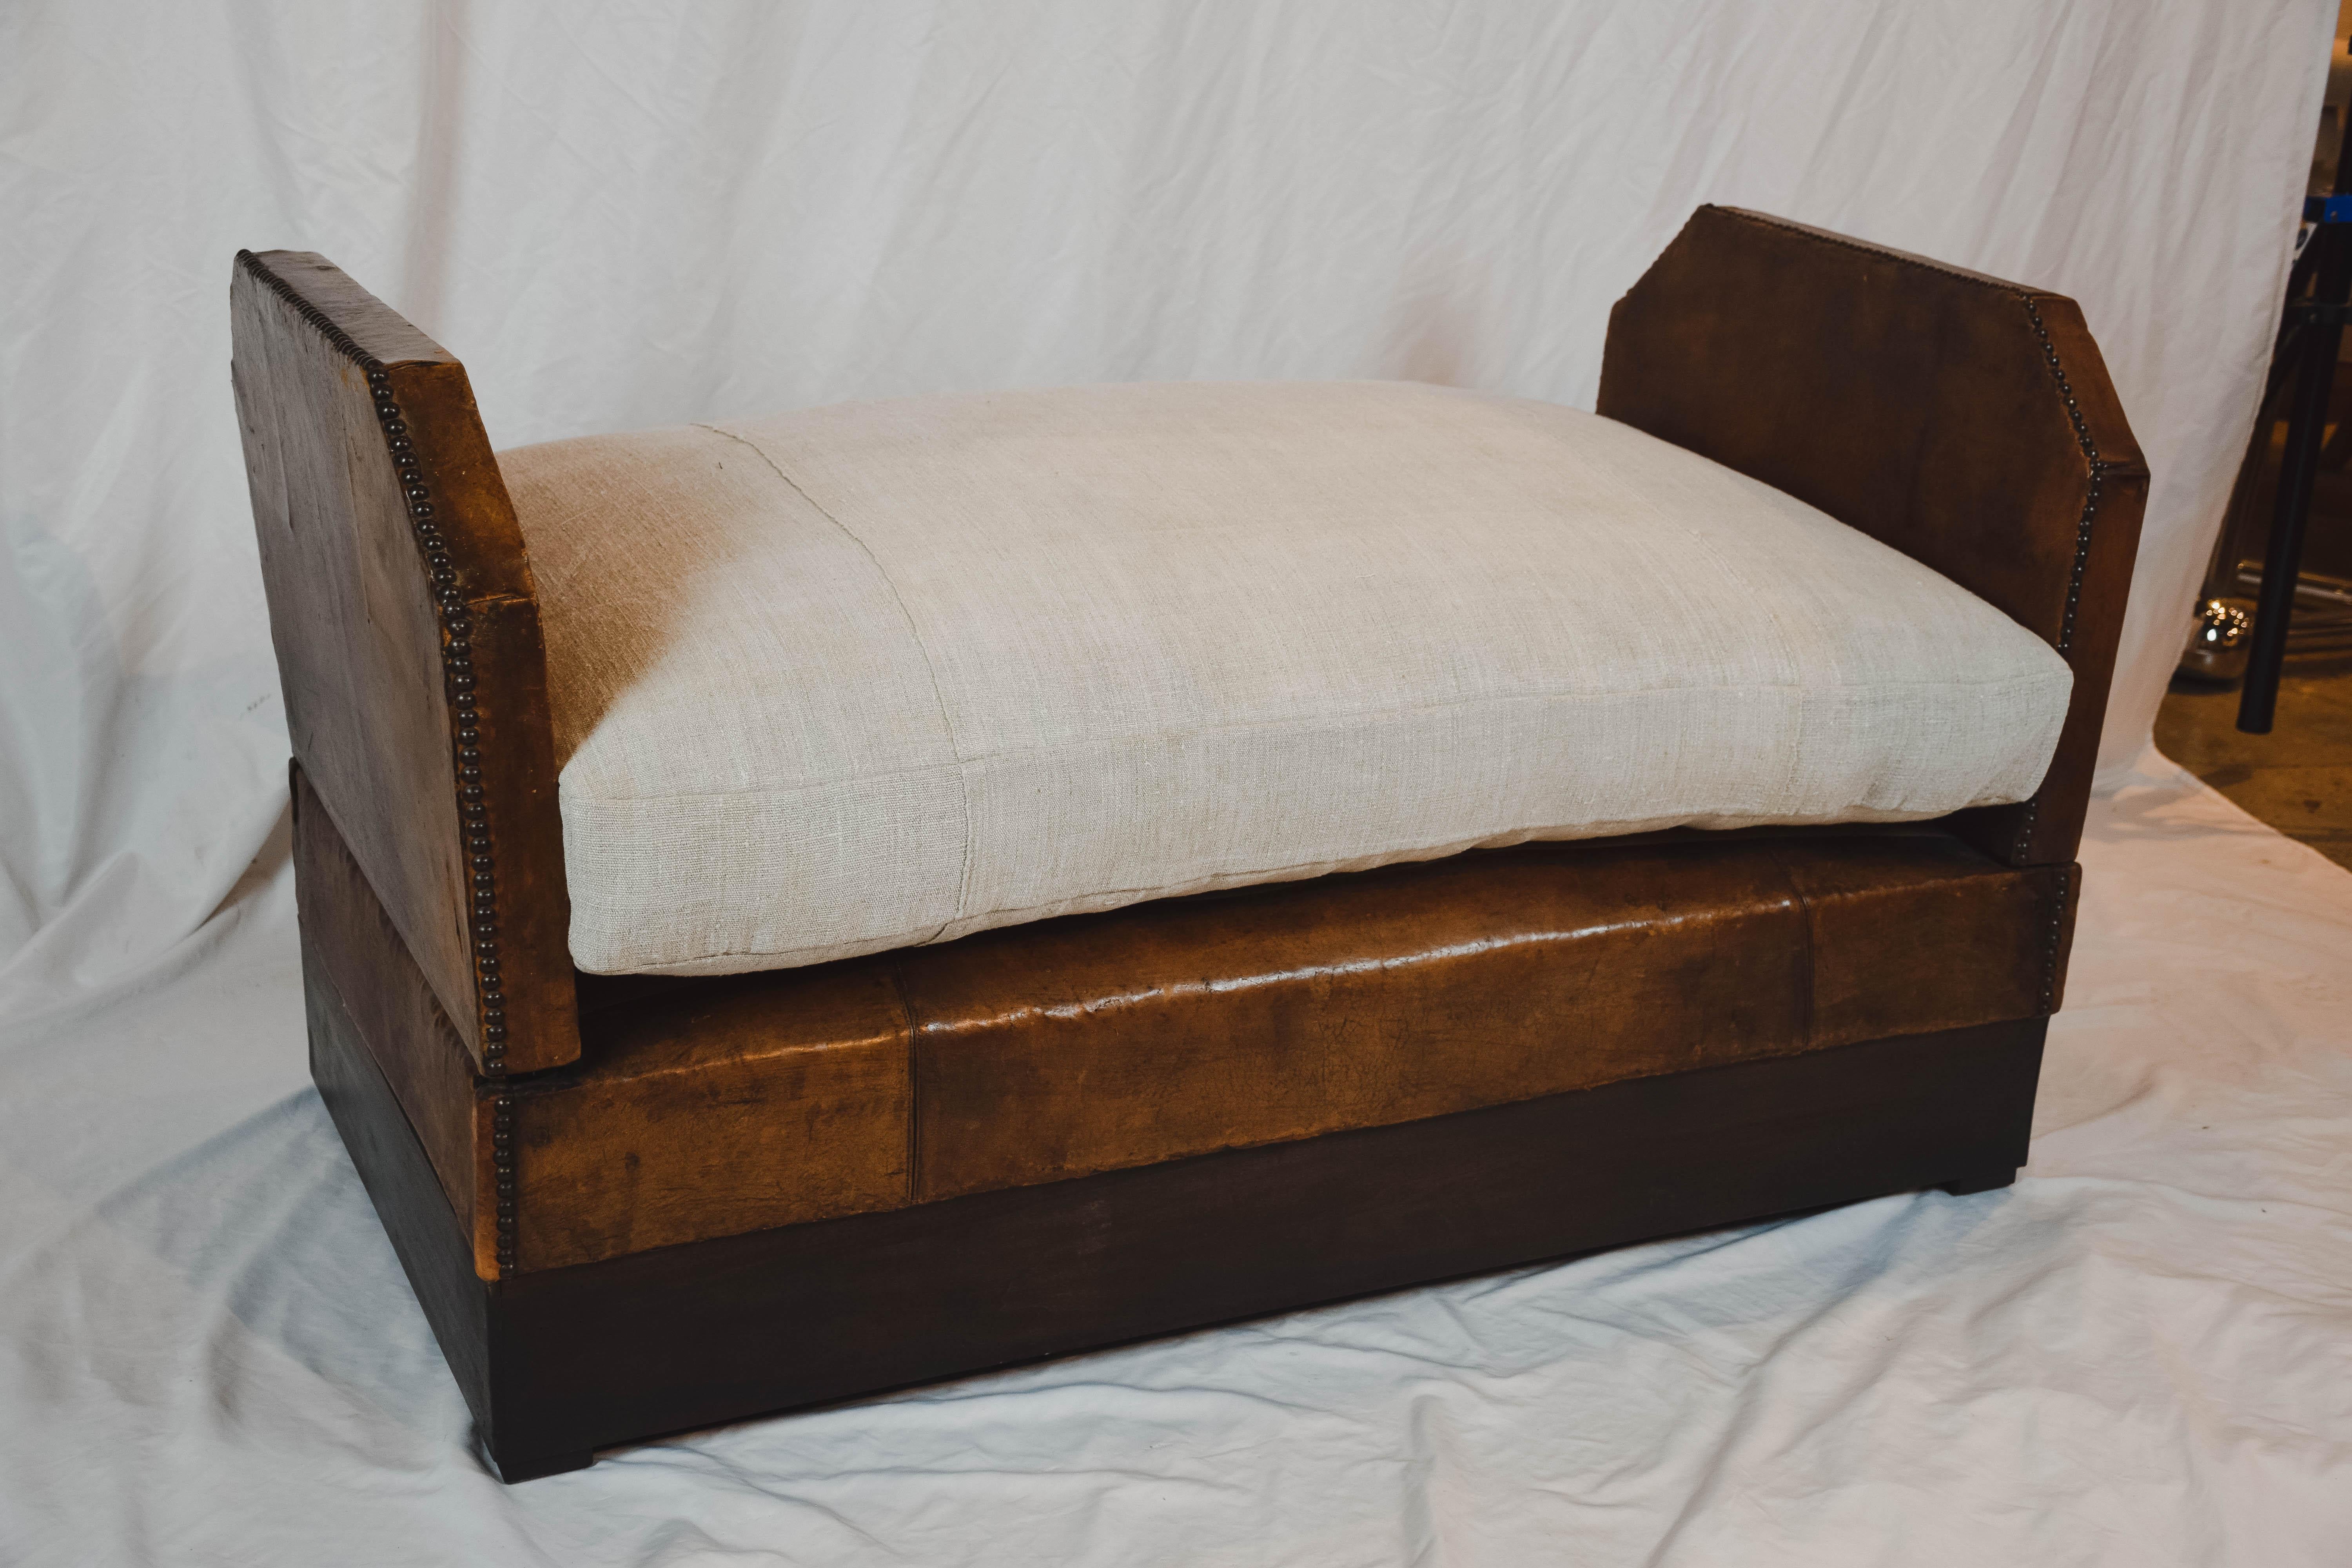 An antique leather daybed from France that is as versatile as it is unique. With both sides up it is a small settee while with one of the drop sides down and the other at an angle it becomes a chaise. Dropping both sides down into its fully opened